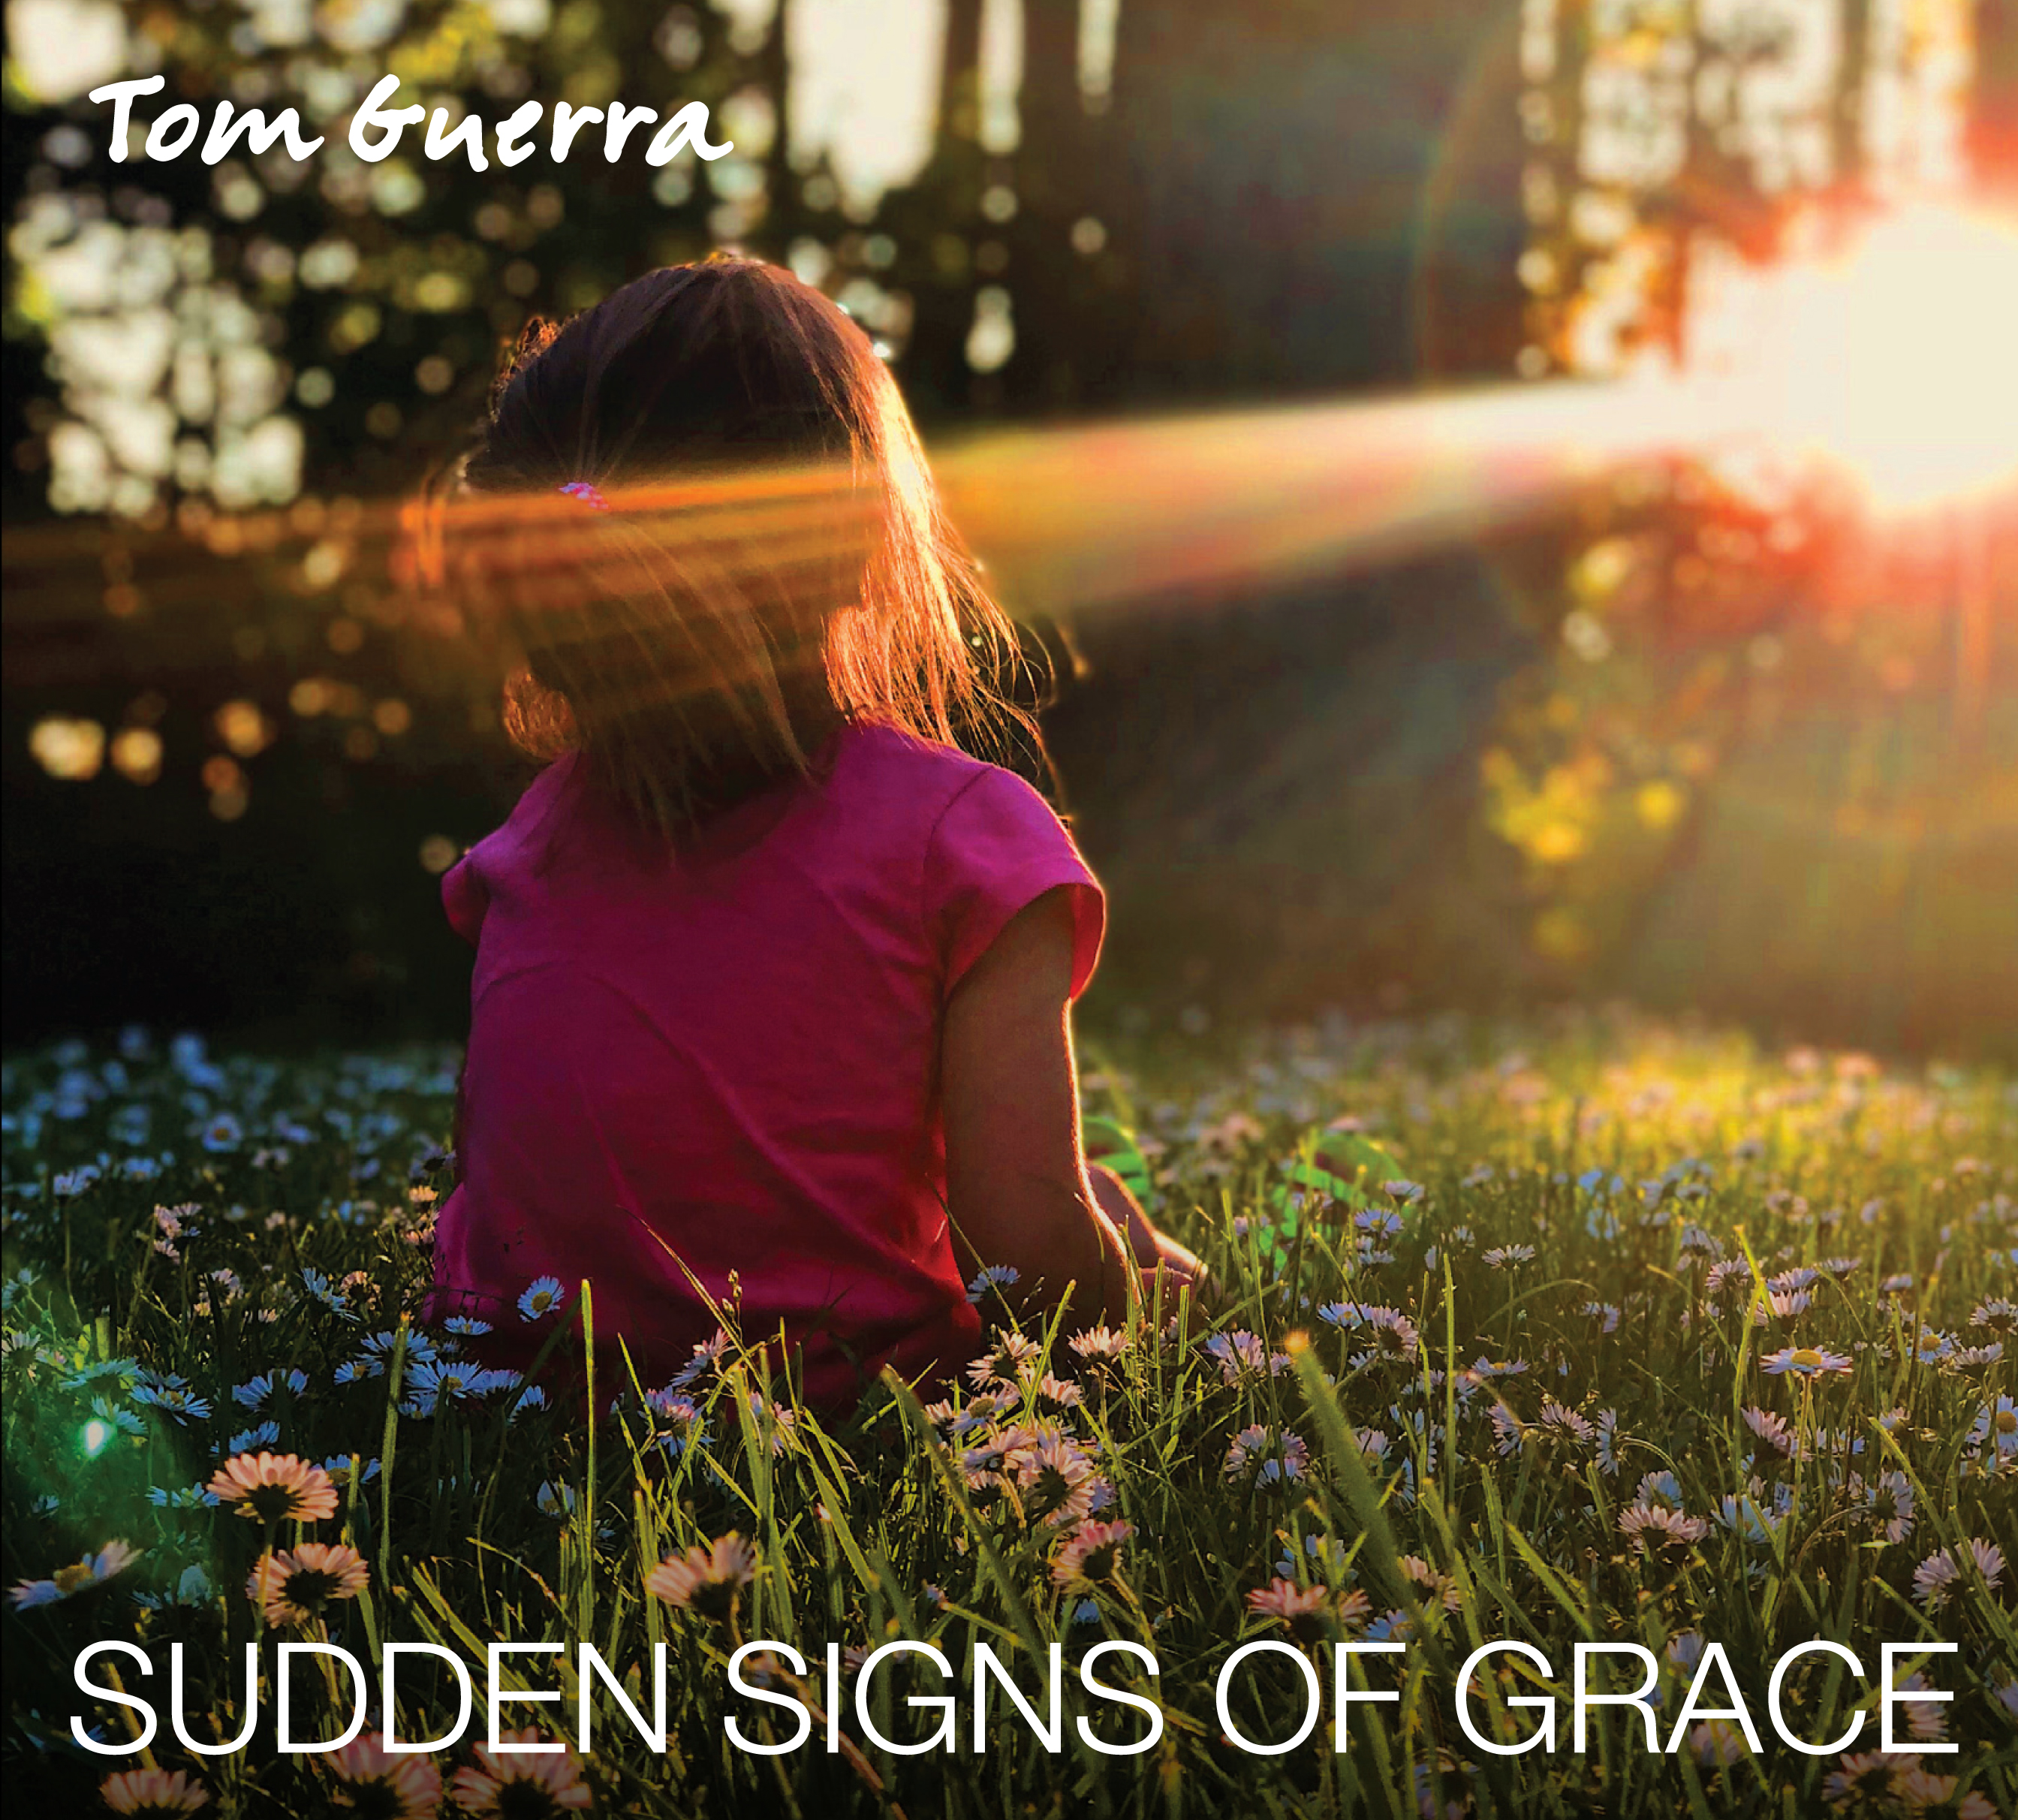 Introducing "Sudden Signs of Grace" by Tom Guerra